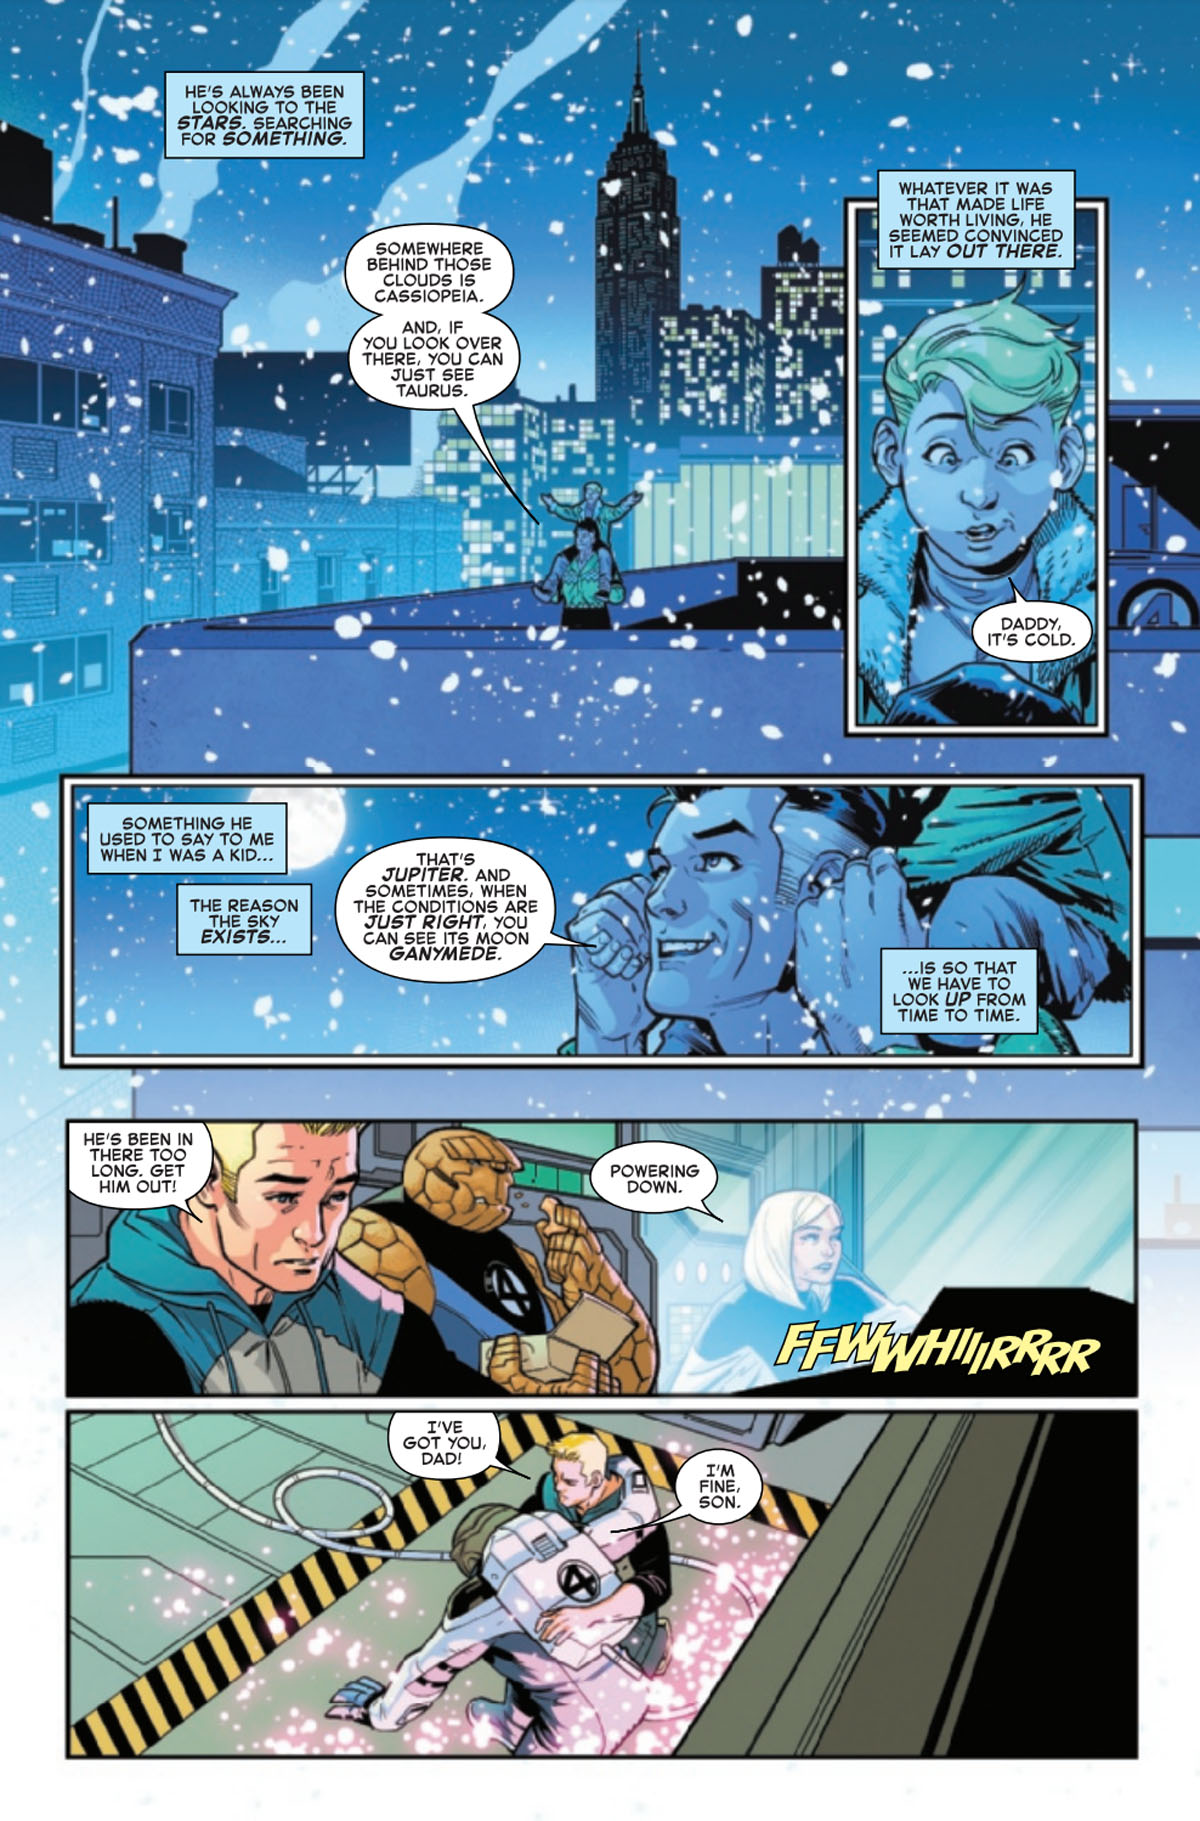 Fantastic Four: Life Story #5 page 3